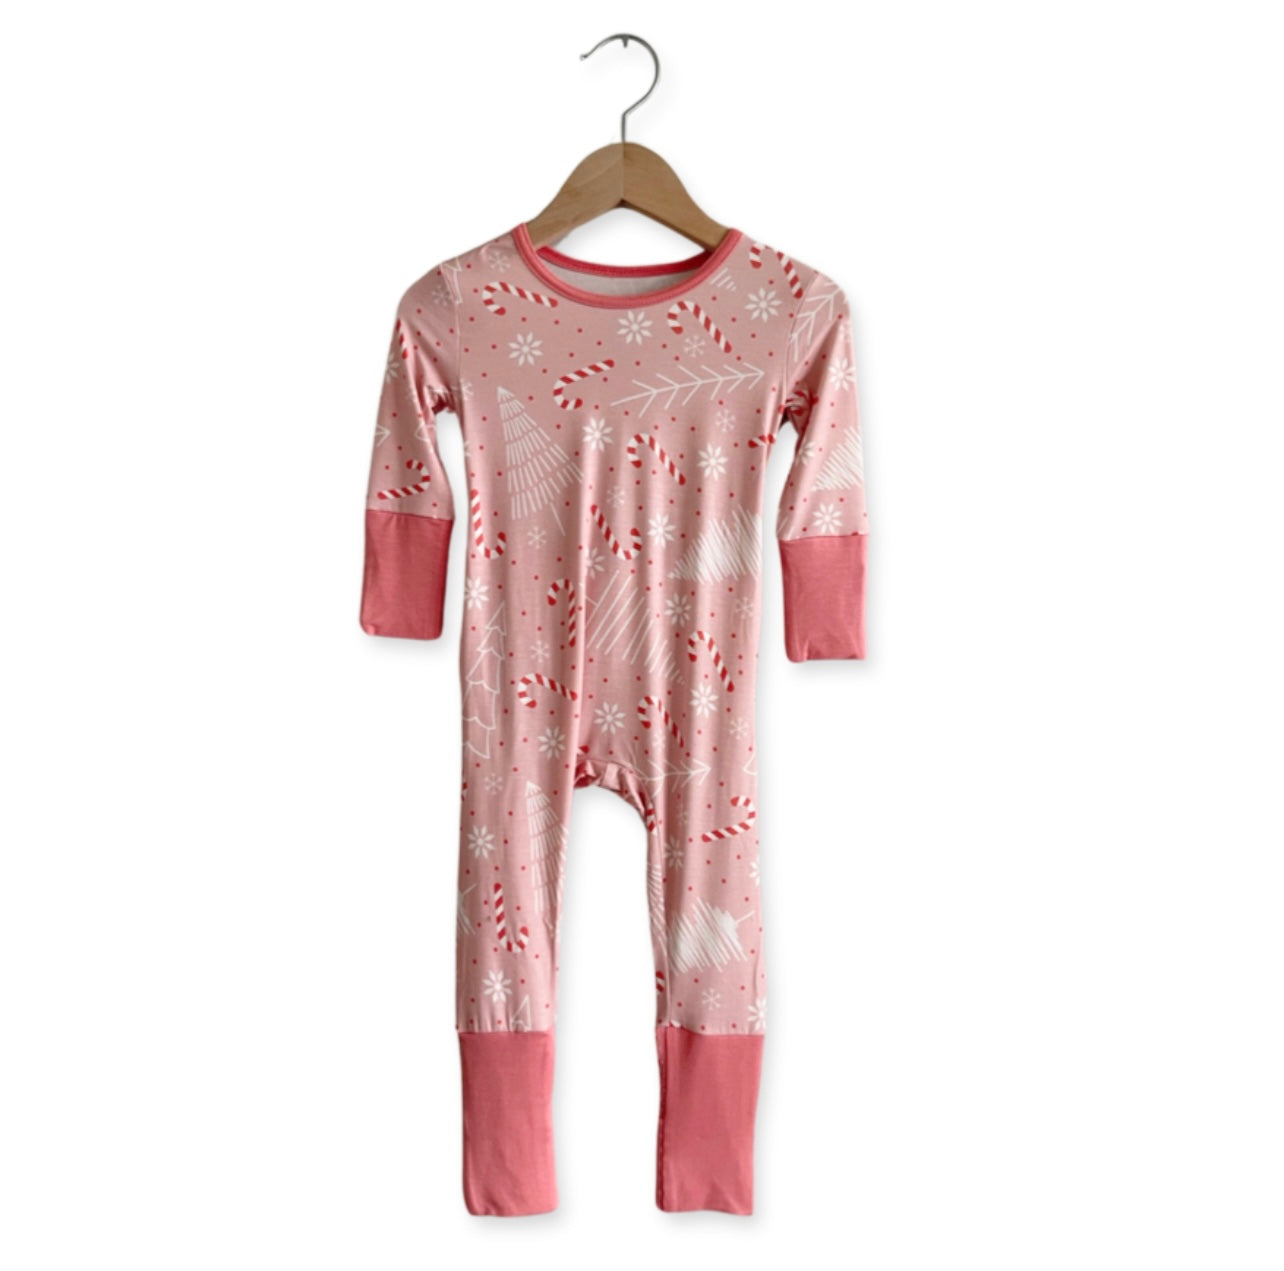 Candy Cane Lane At Your Leisure Essential Adult Romper- 3X-5X